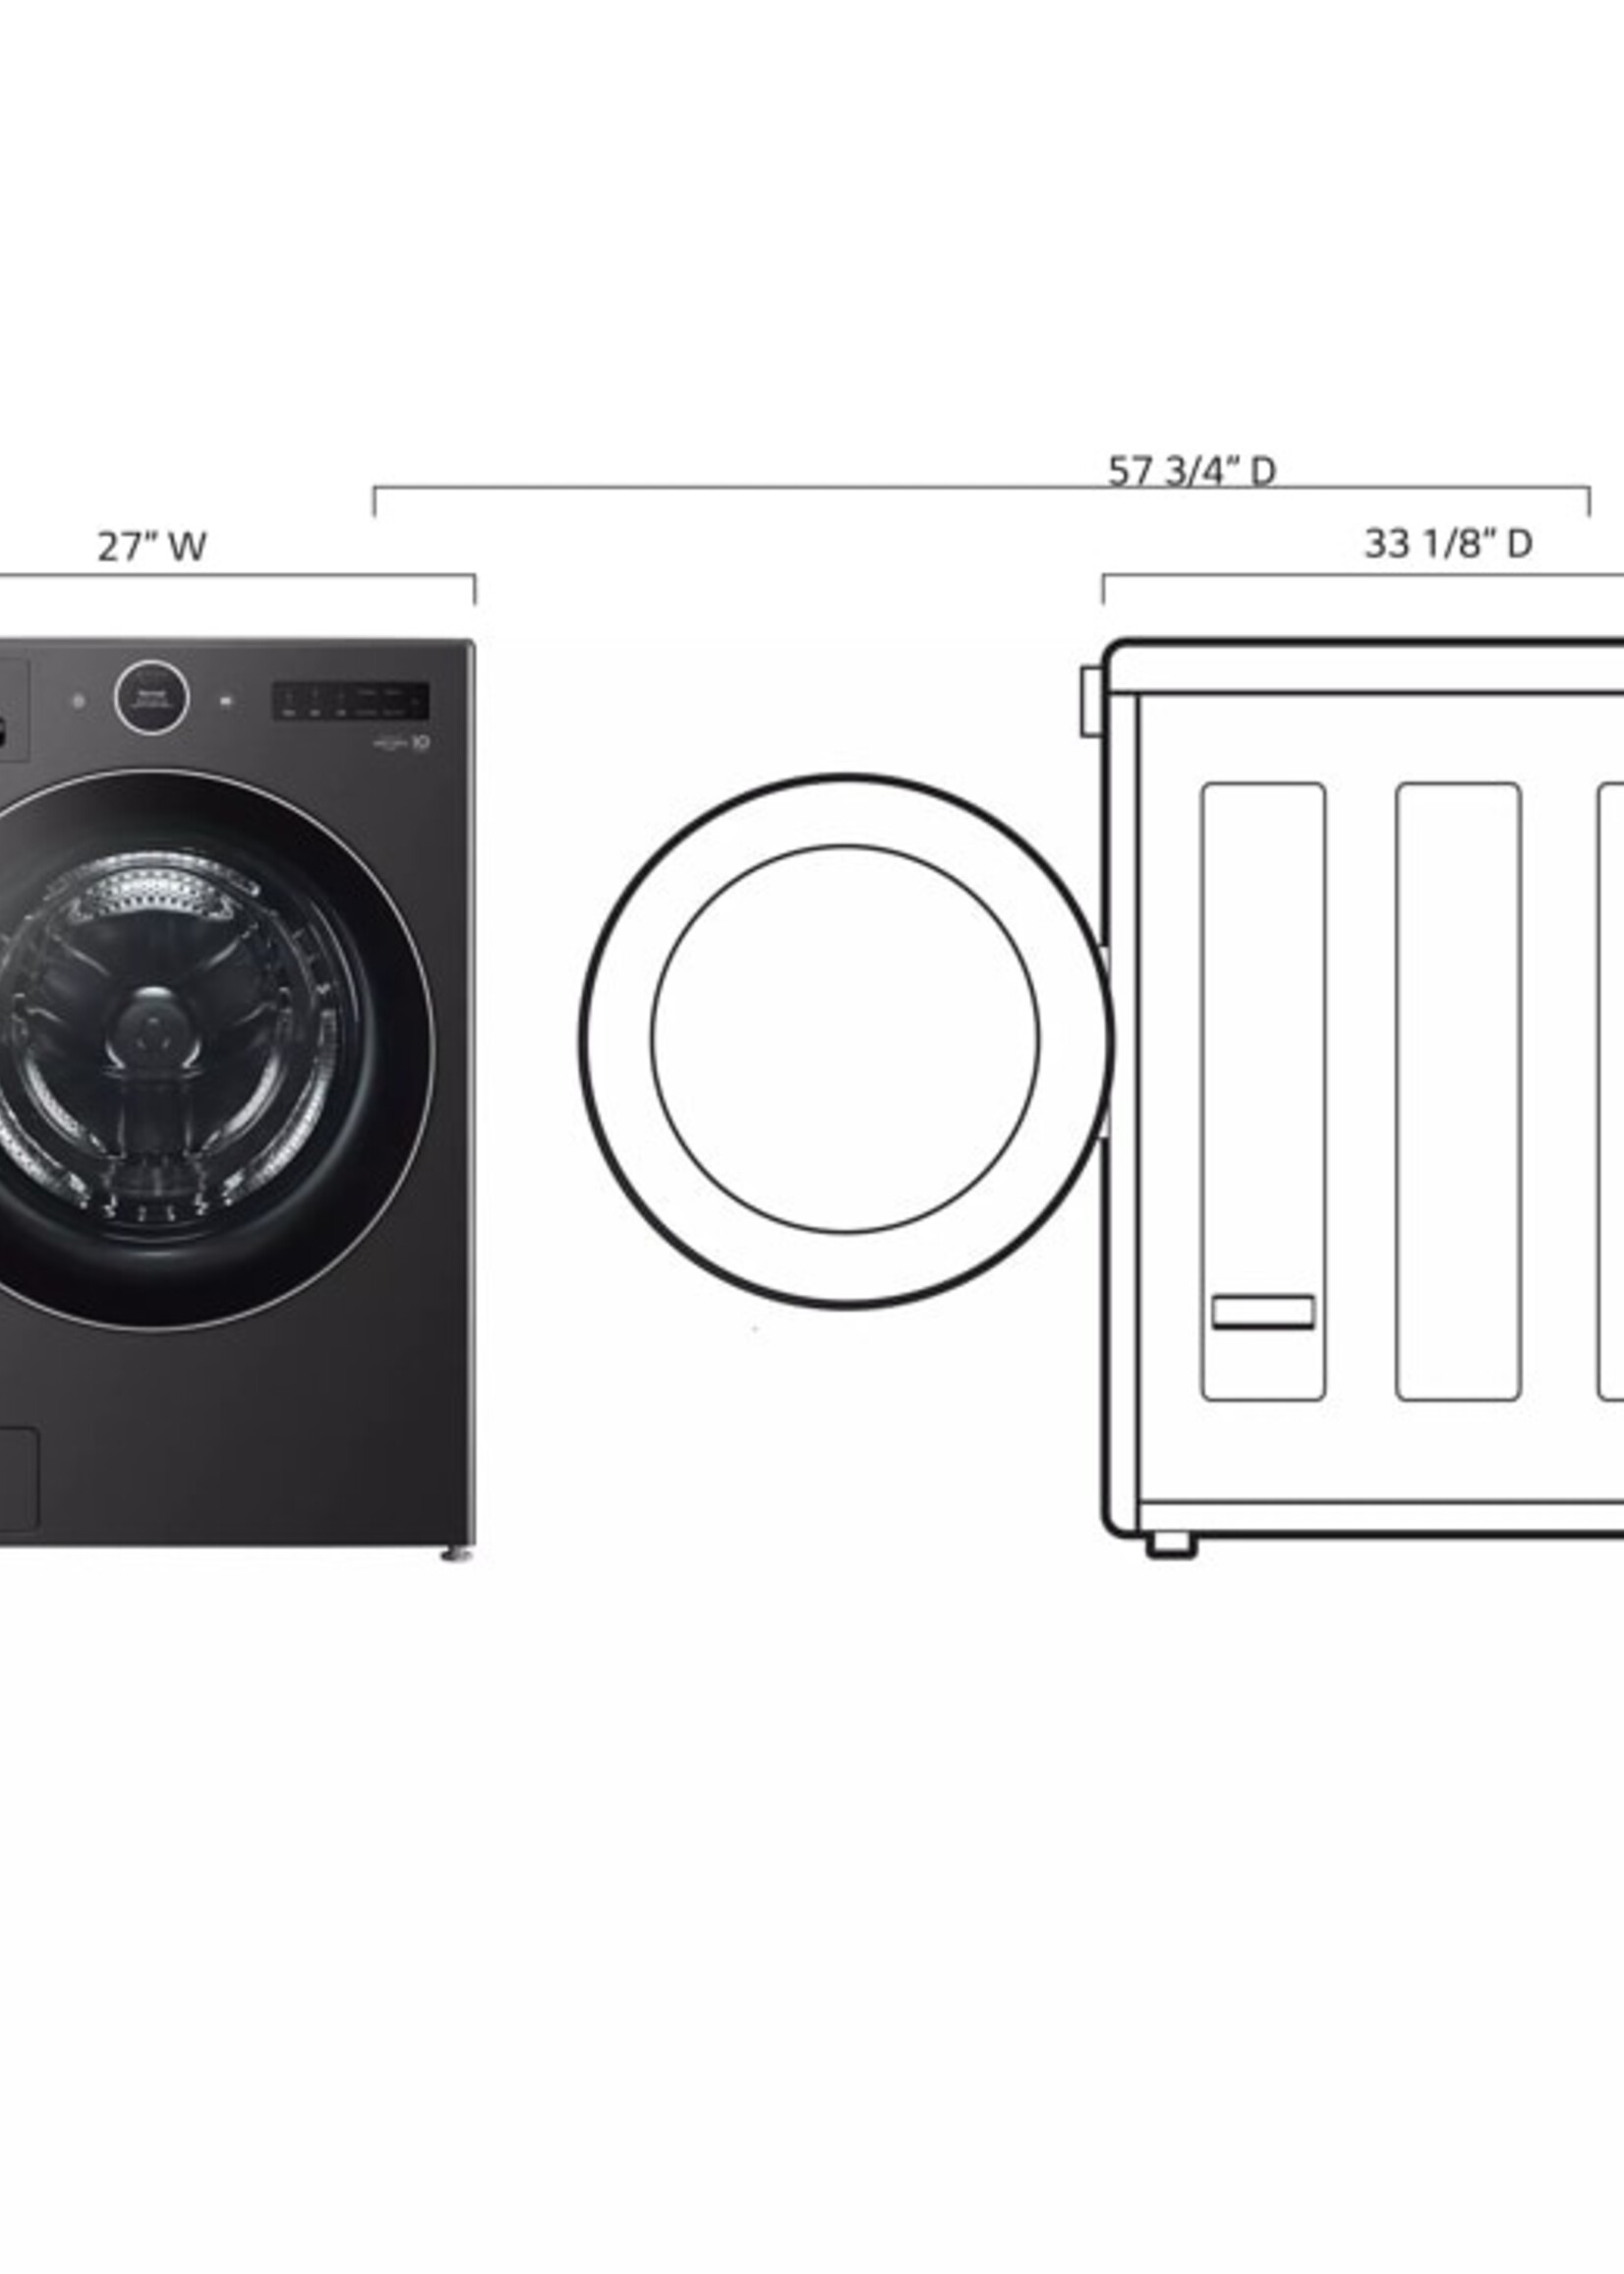 LG WM6998HBA - Ventless Washer/Dryer Combo LG WashCombo™ All-in-One